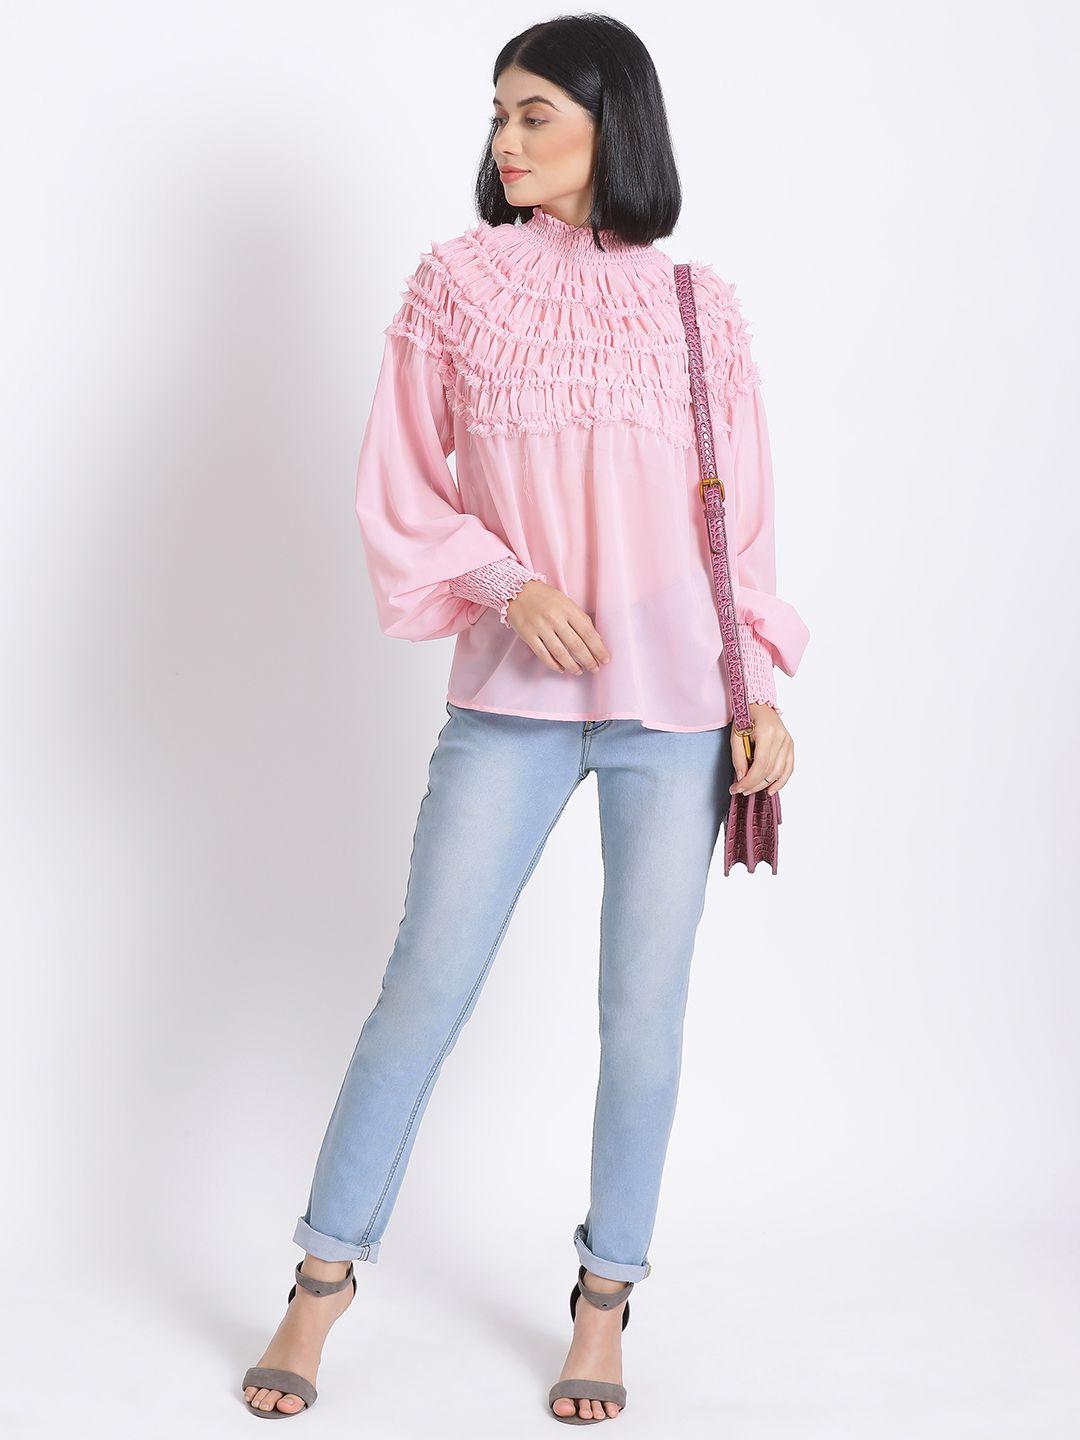 oxolloxo-pink-puff-sleeves-a-line-smocked-top